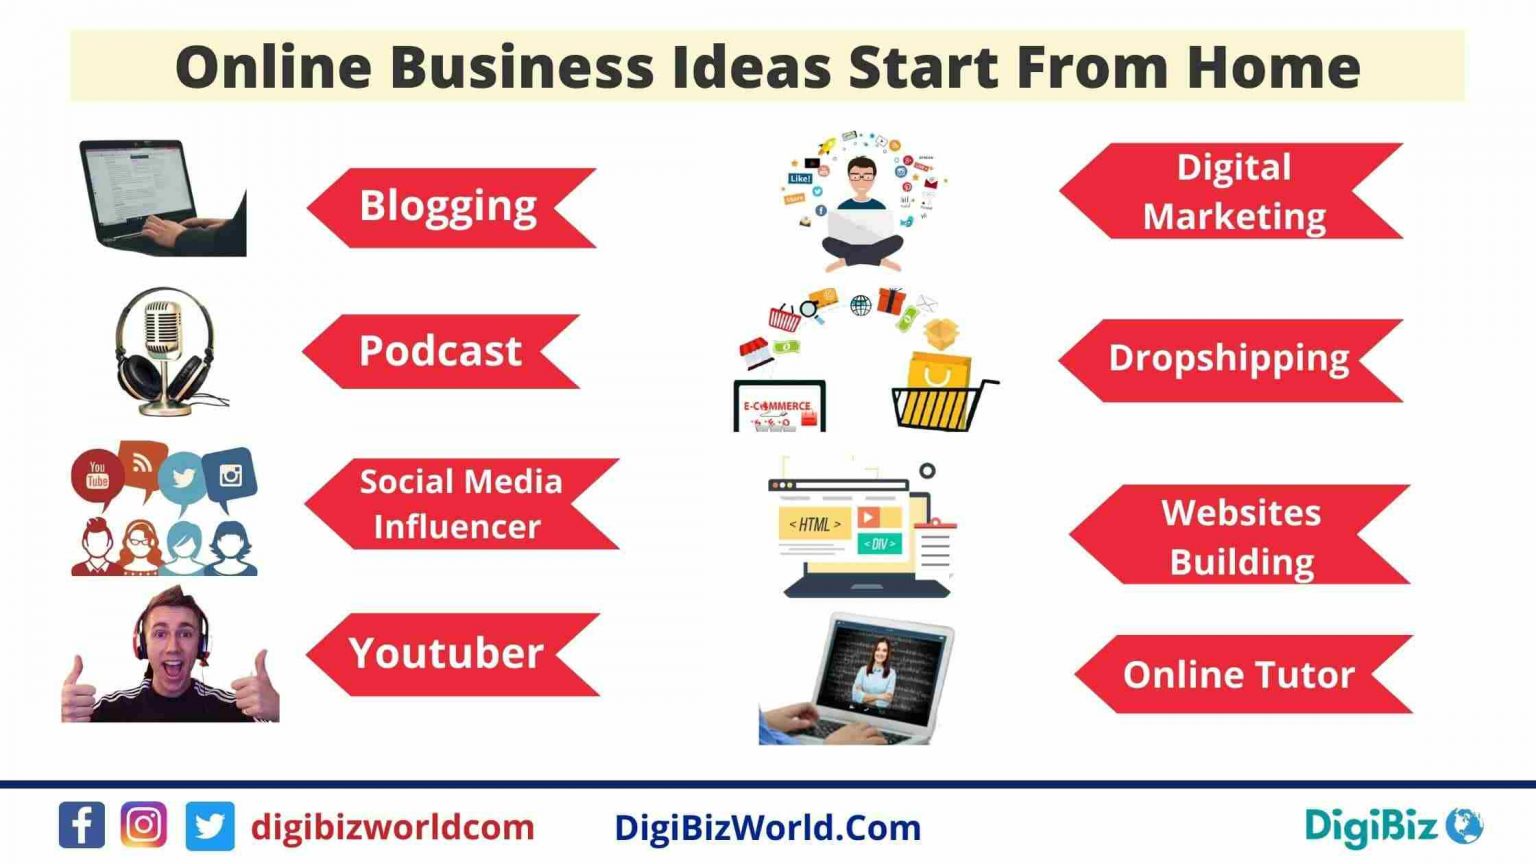 Best Online Business Ideas to start from home in 2021